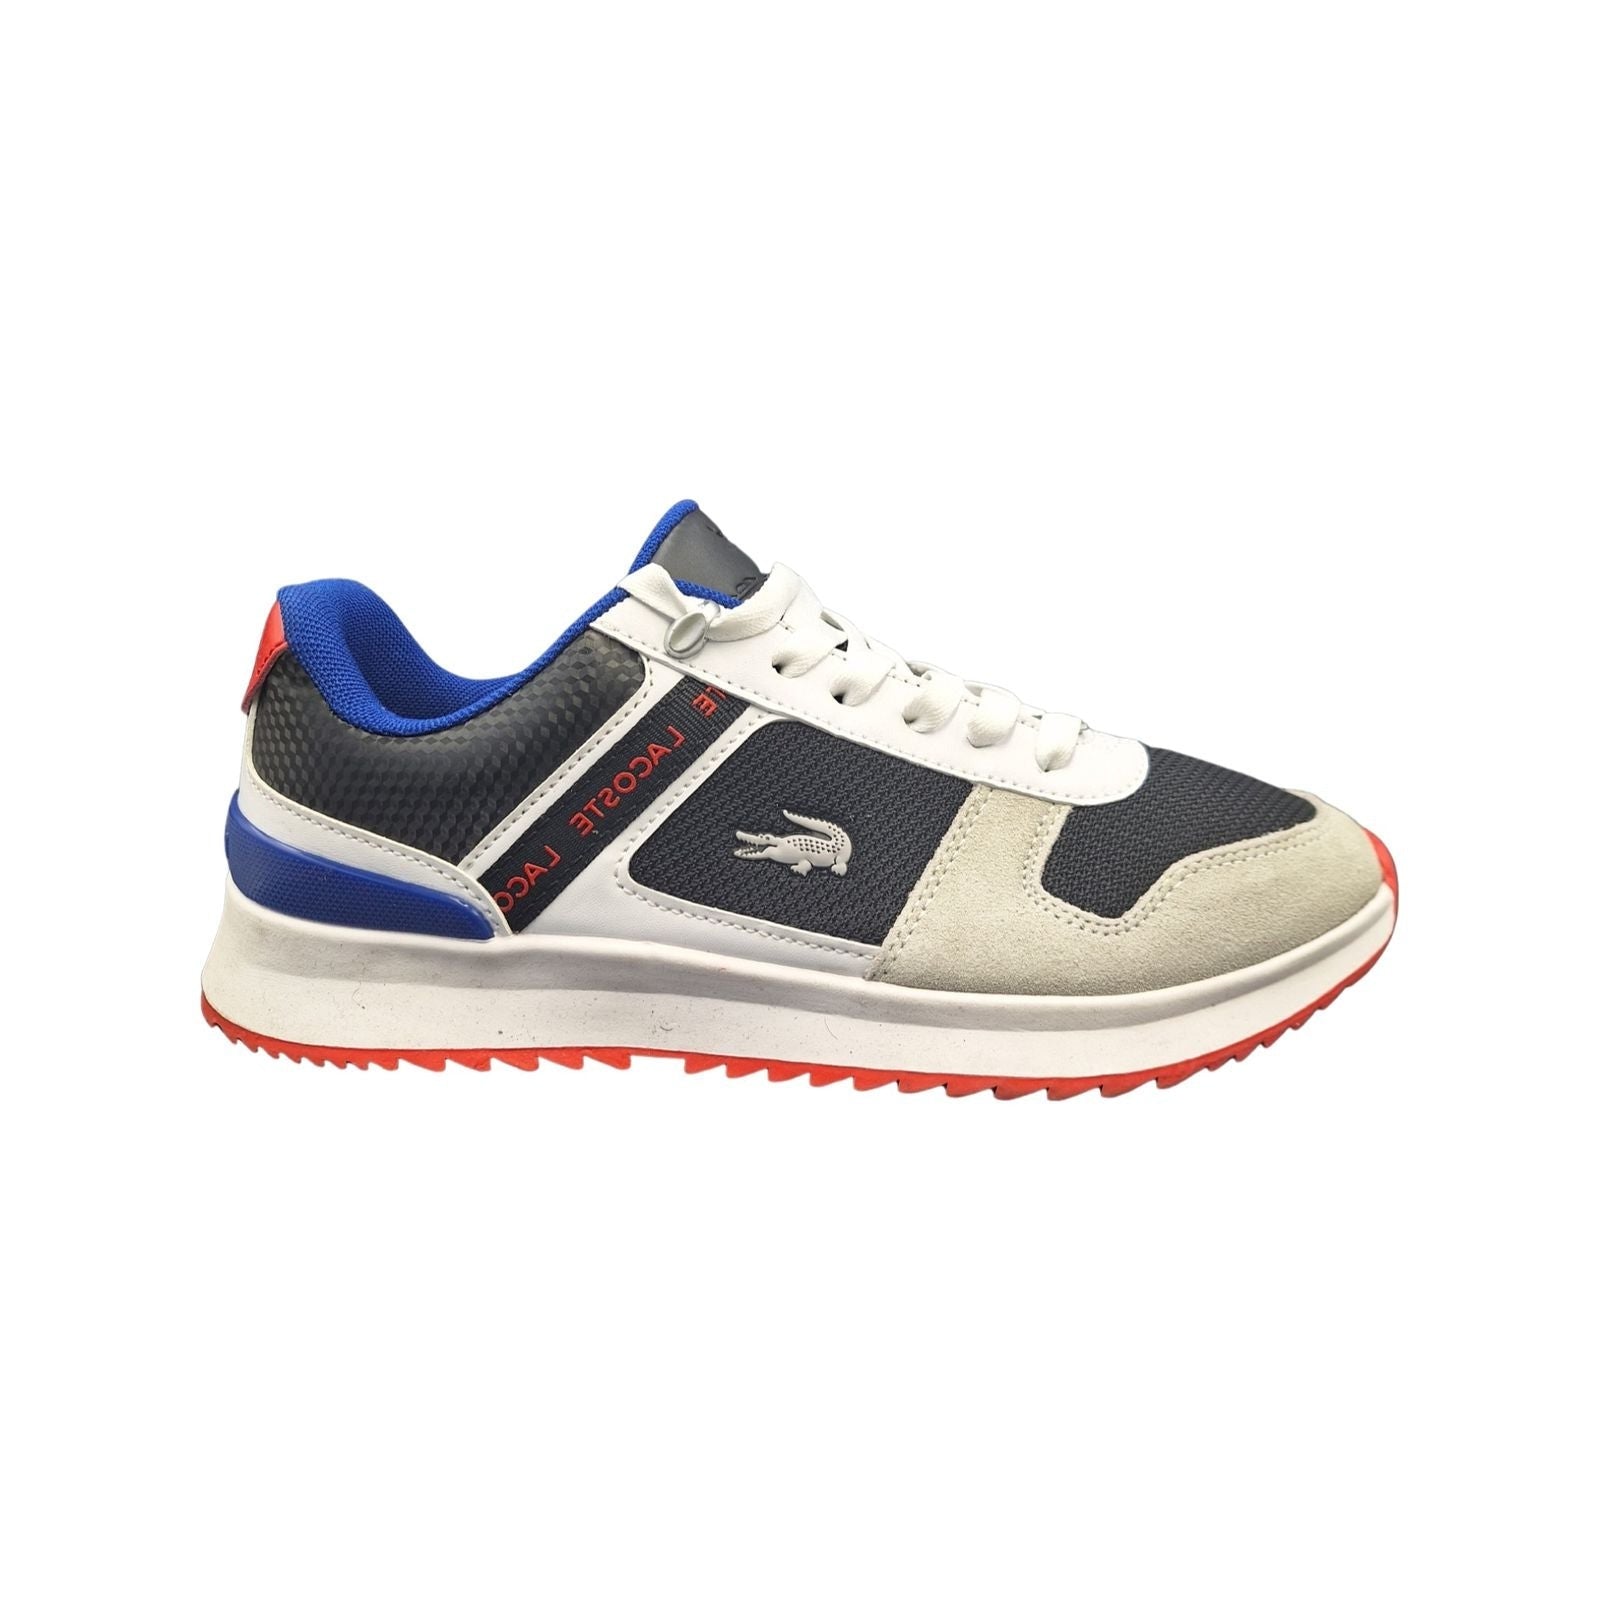 Lacoste Joggeur 2.0 Mens Trainers - Soleful